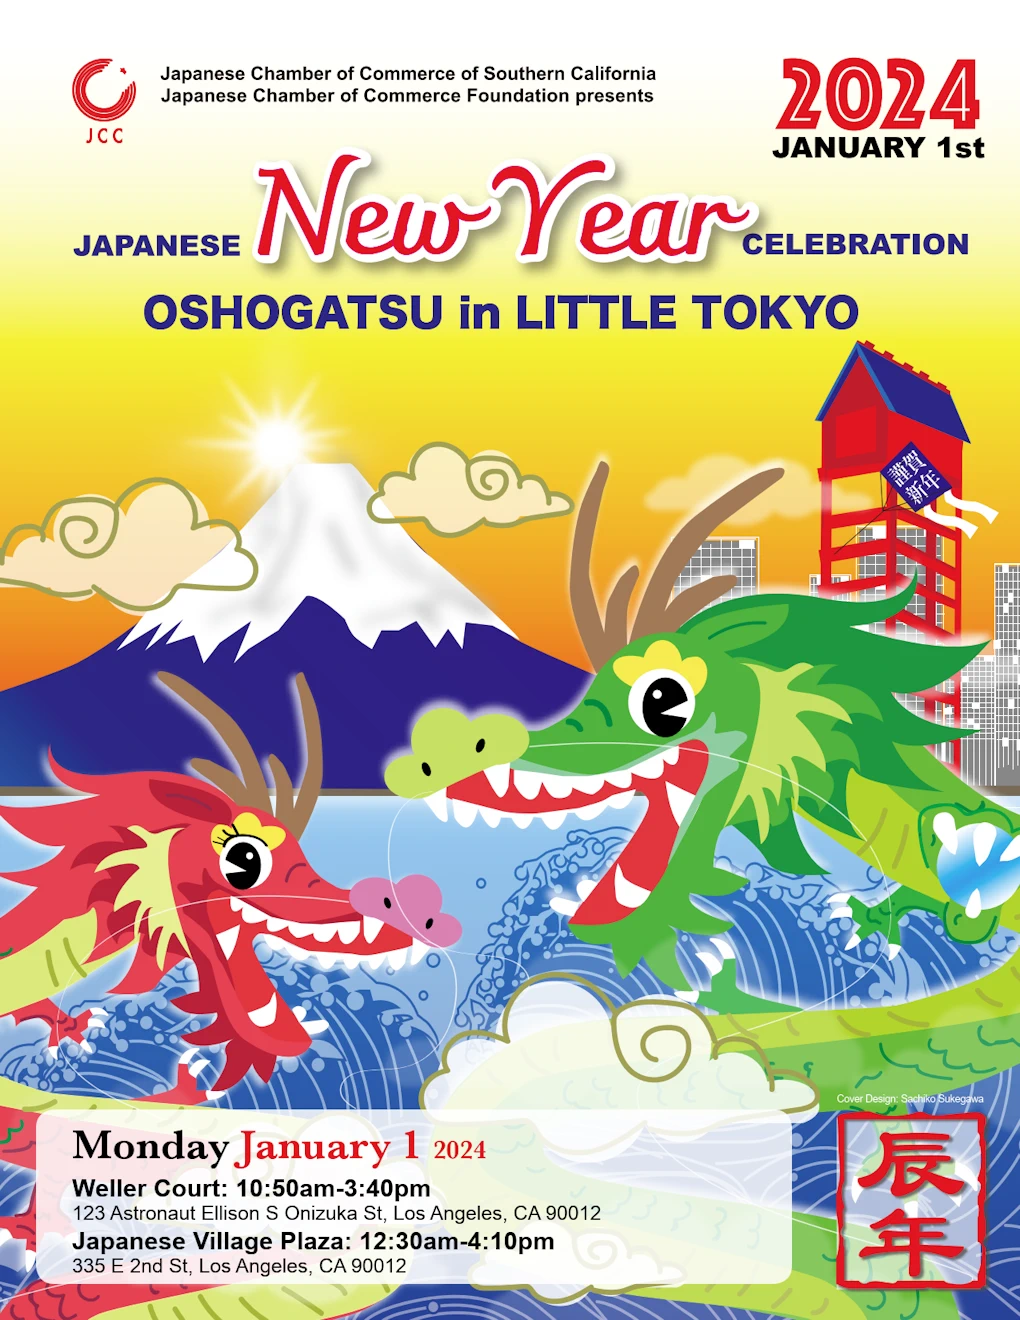 2024 - 25th Annual Japanese New Year's Oshogatsu Festival Event - Little Tokyo (2 Locations - Jan 1st, 2023) Entertainment - Update Coming